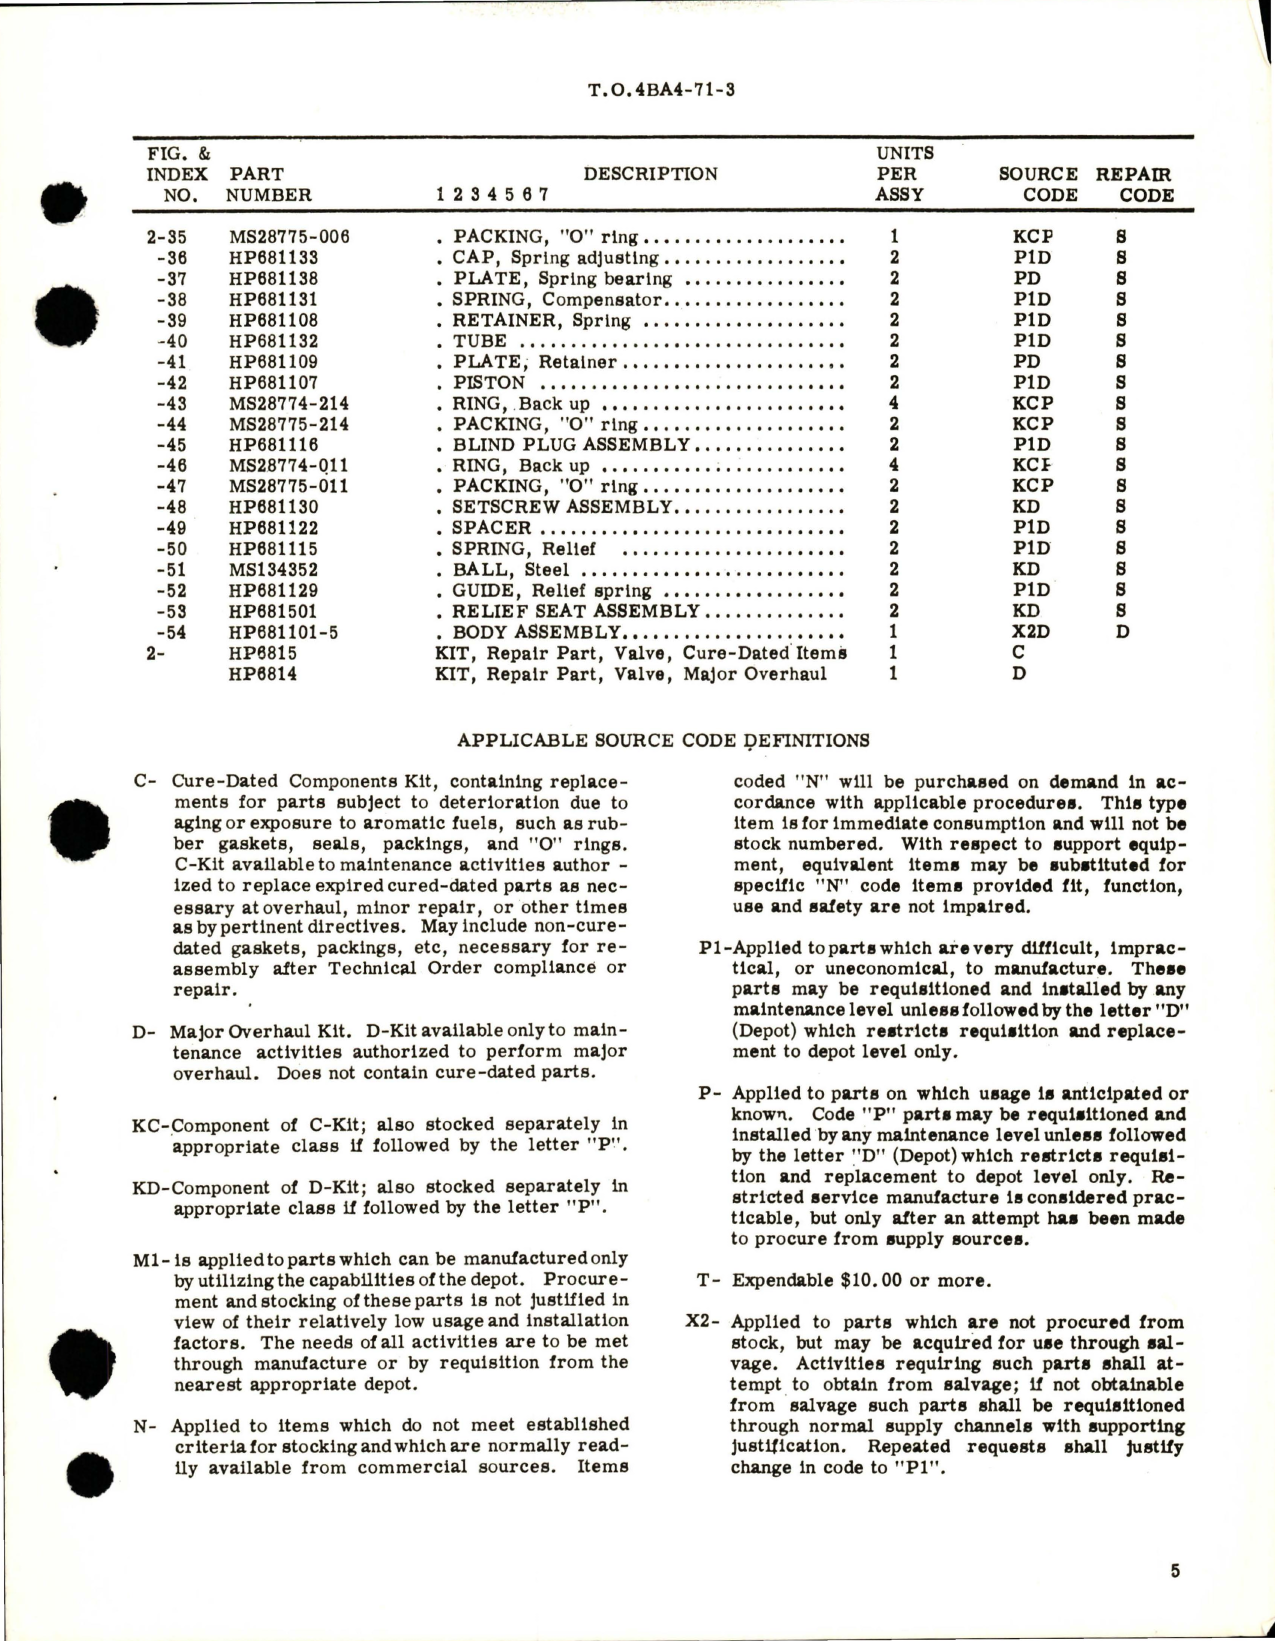 Sample page 5 from AirCorps Library document: Overhaul Instructions with Parts Breakdown for Dual Parking Brake Valve, Part HP 681100-5